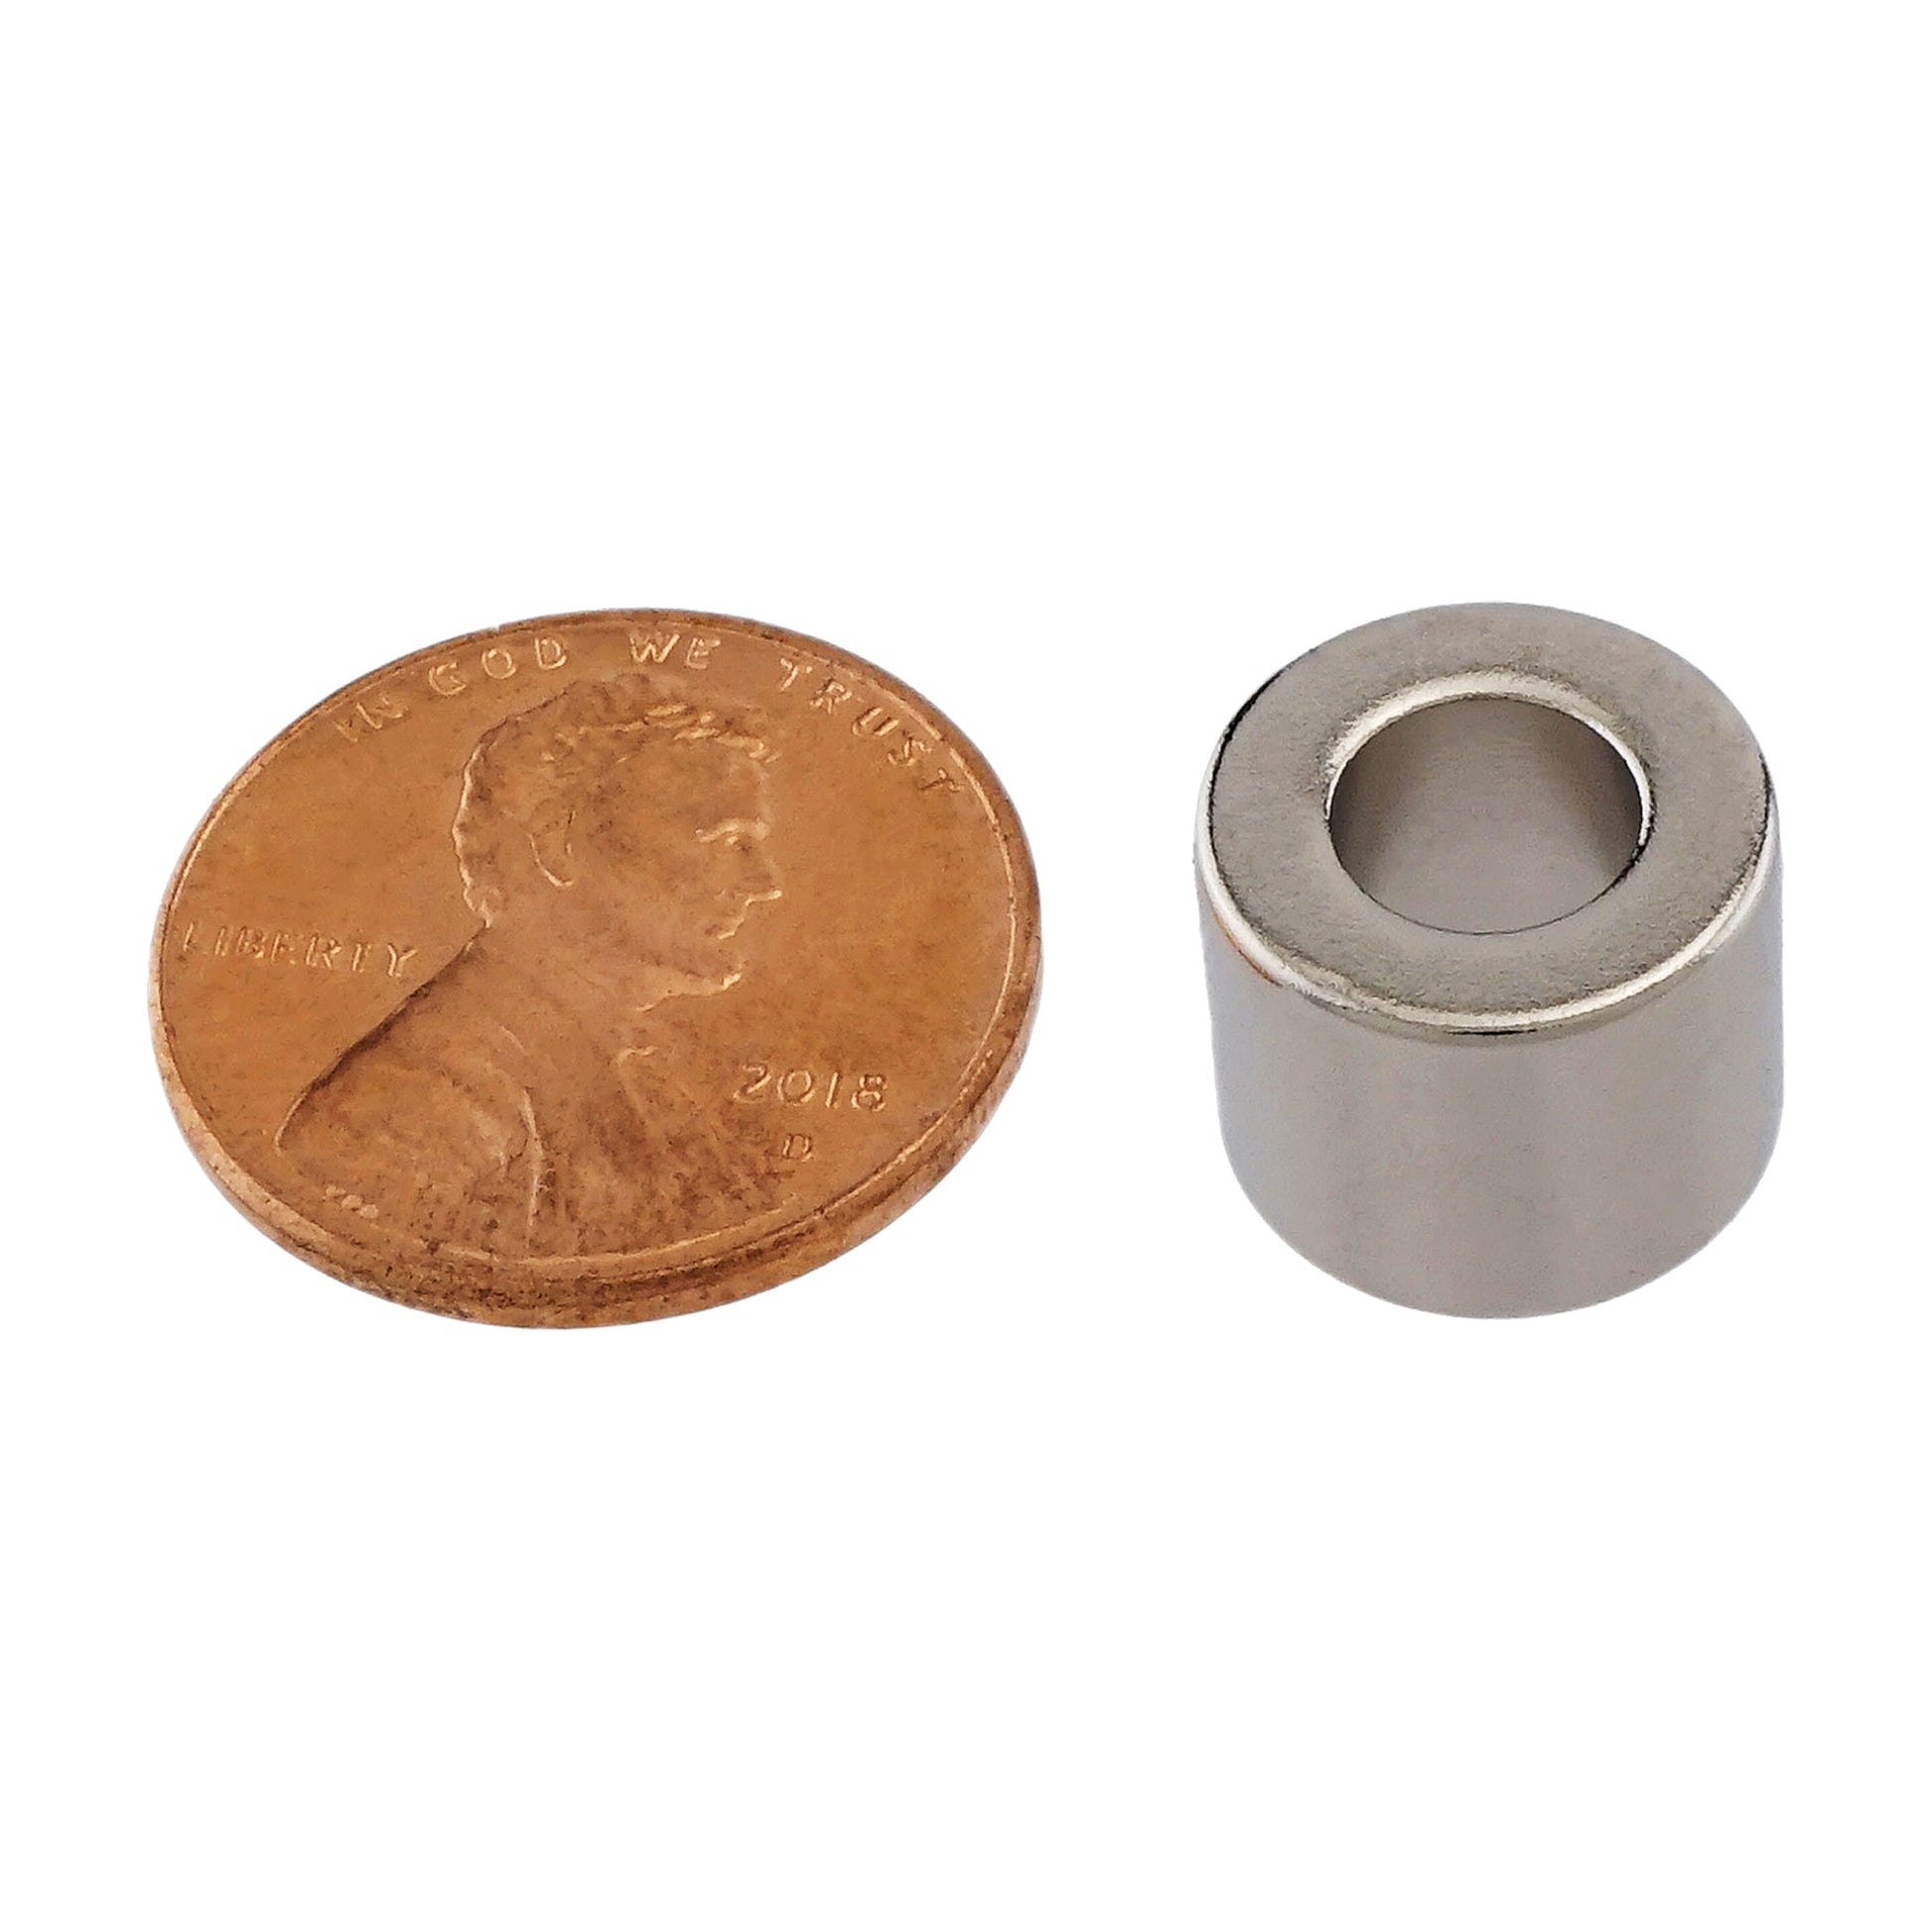 Load image into Gallery viewer, NR004705N Neodymium Ring Magnet - Compared to Penny for Size Reference